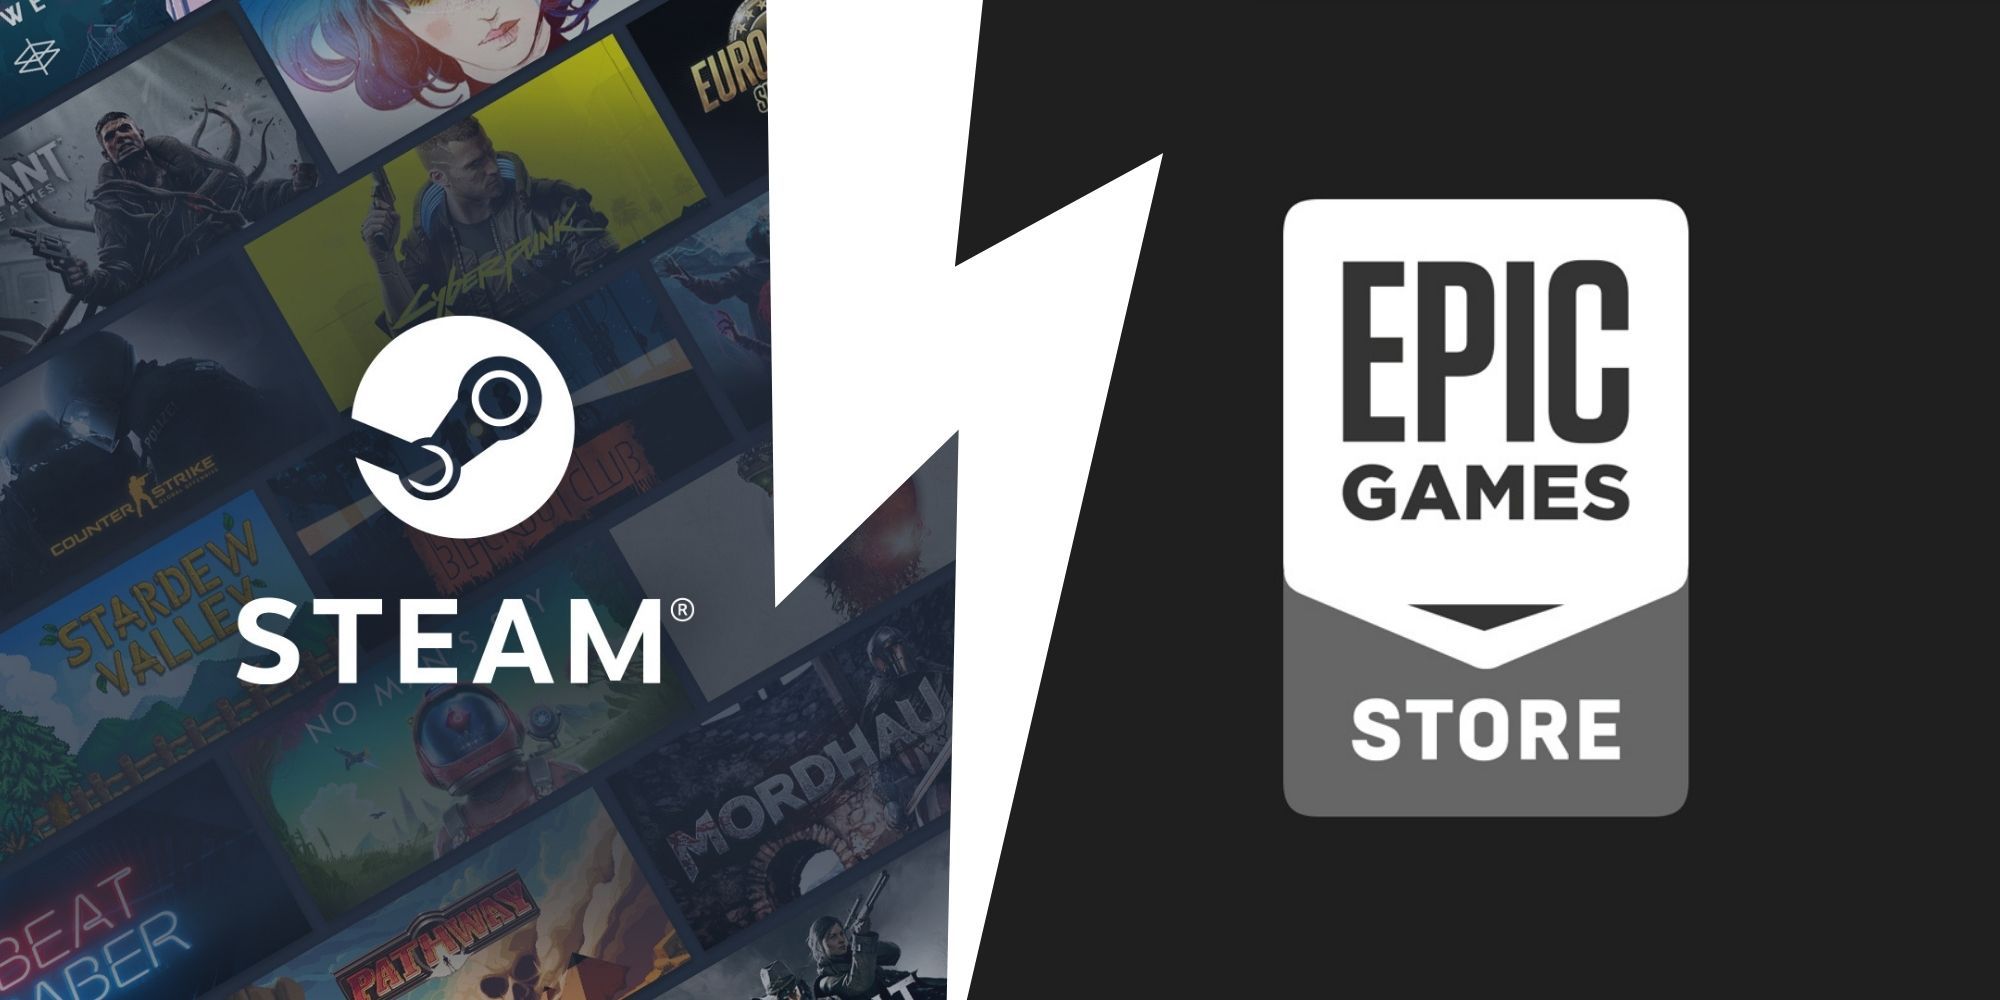 Crossplay between Epic Games Store and Steam is finally here